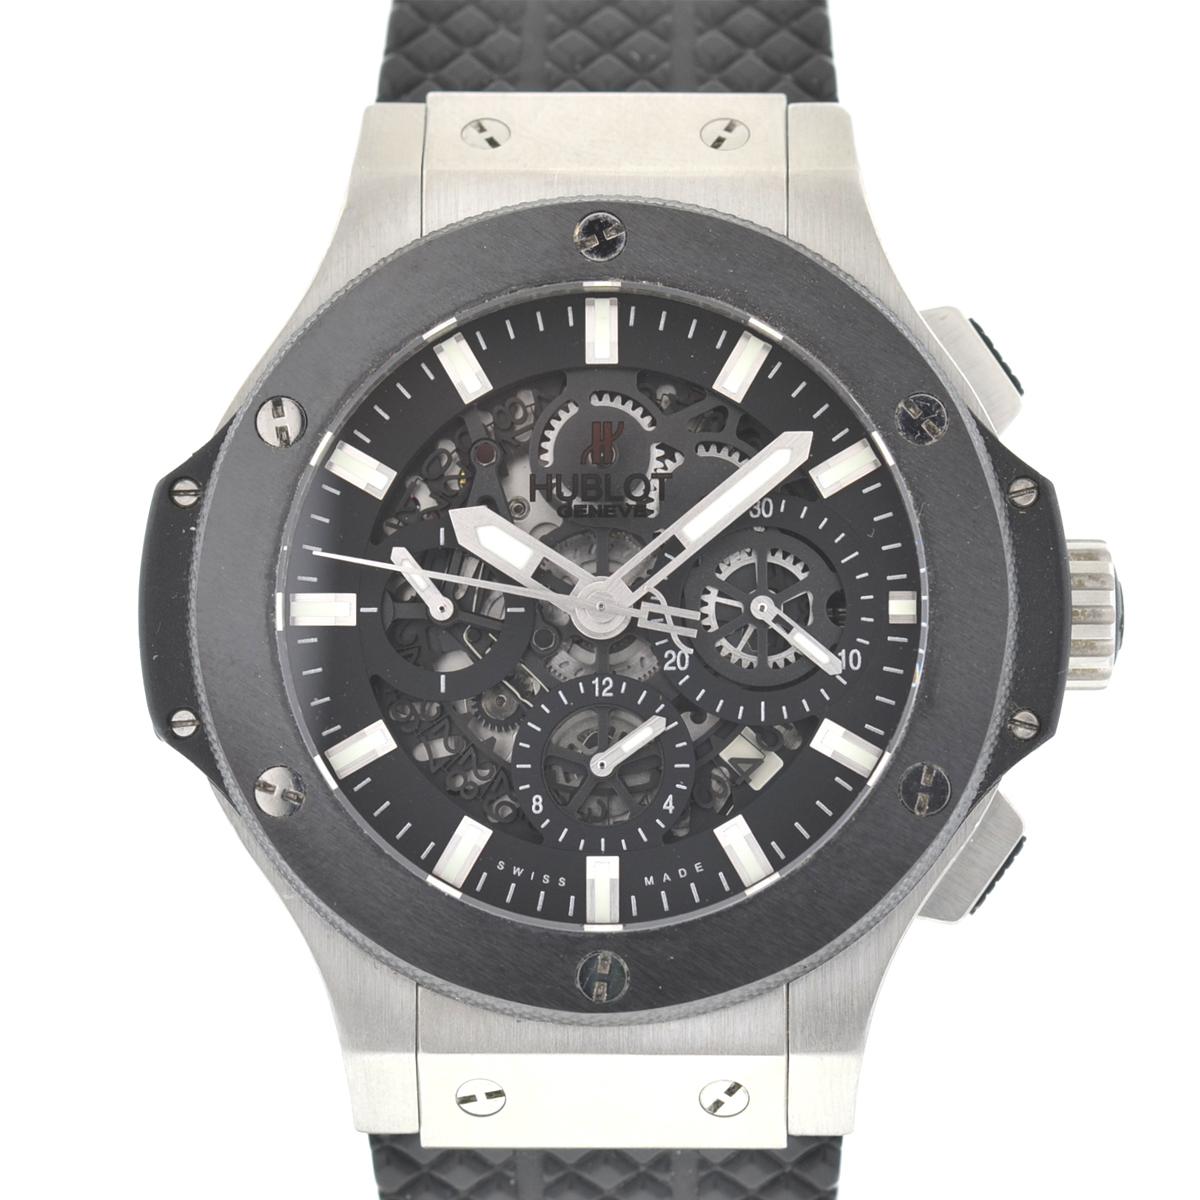 Company - Hublot
Style - Luxury Sport Watch
Model - Big Bang Aero Bang
Reference Number - 311.SM.1170.GR
Case Metal - Stainless Steel
Case Measurement - 44mm
Bracelet - Rubber (includes two extra straps, one rubber and one leather)
Dial - Black